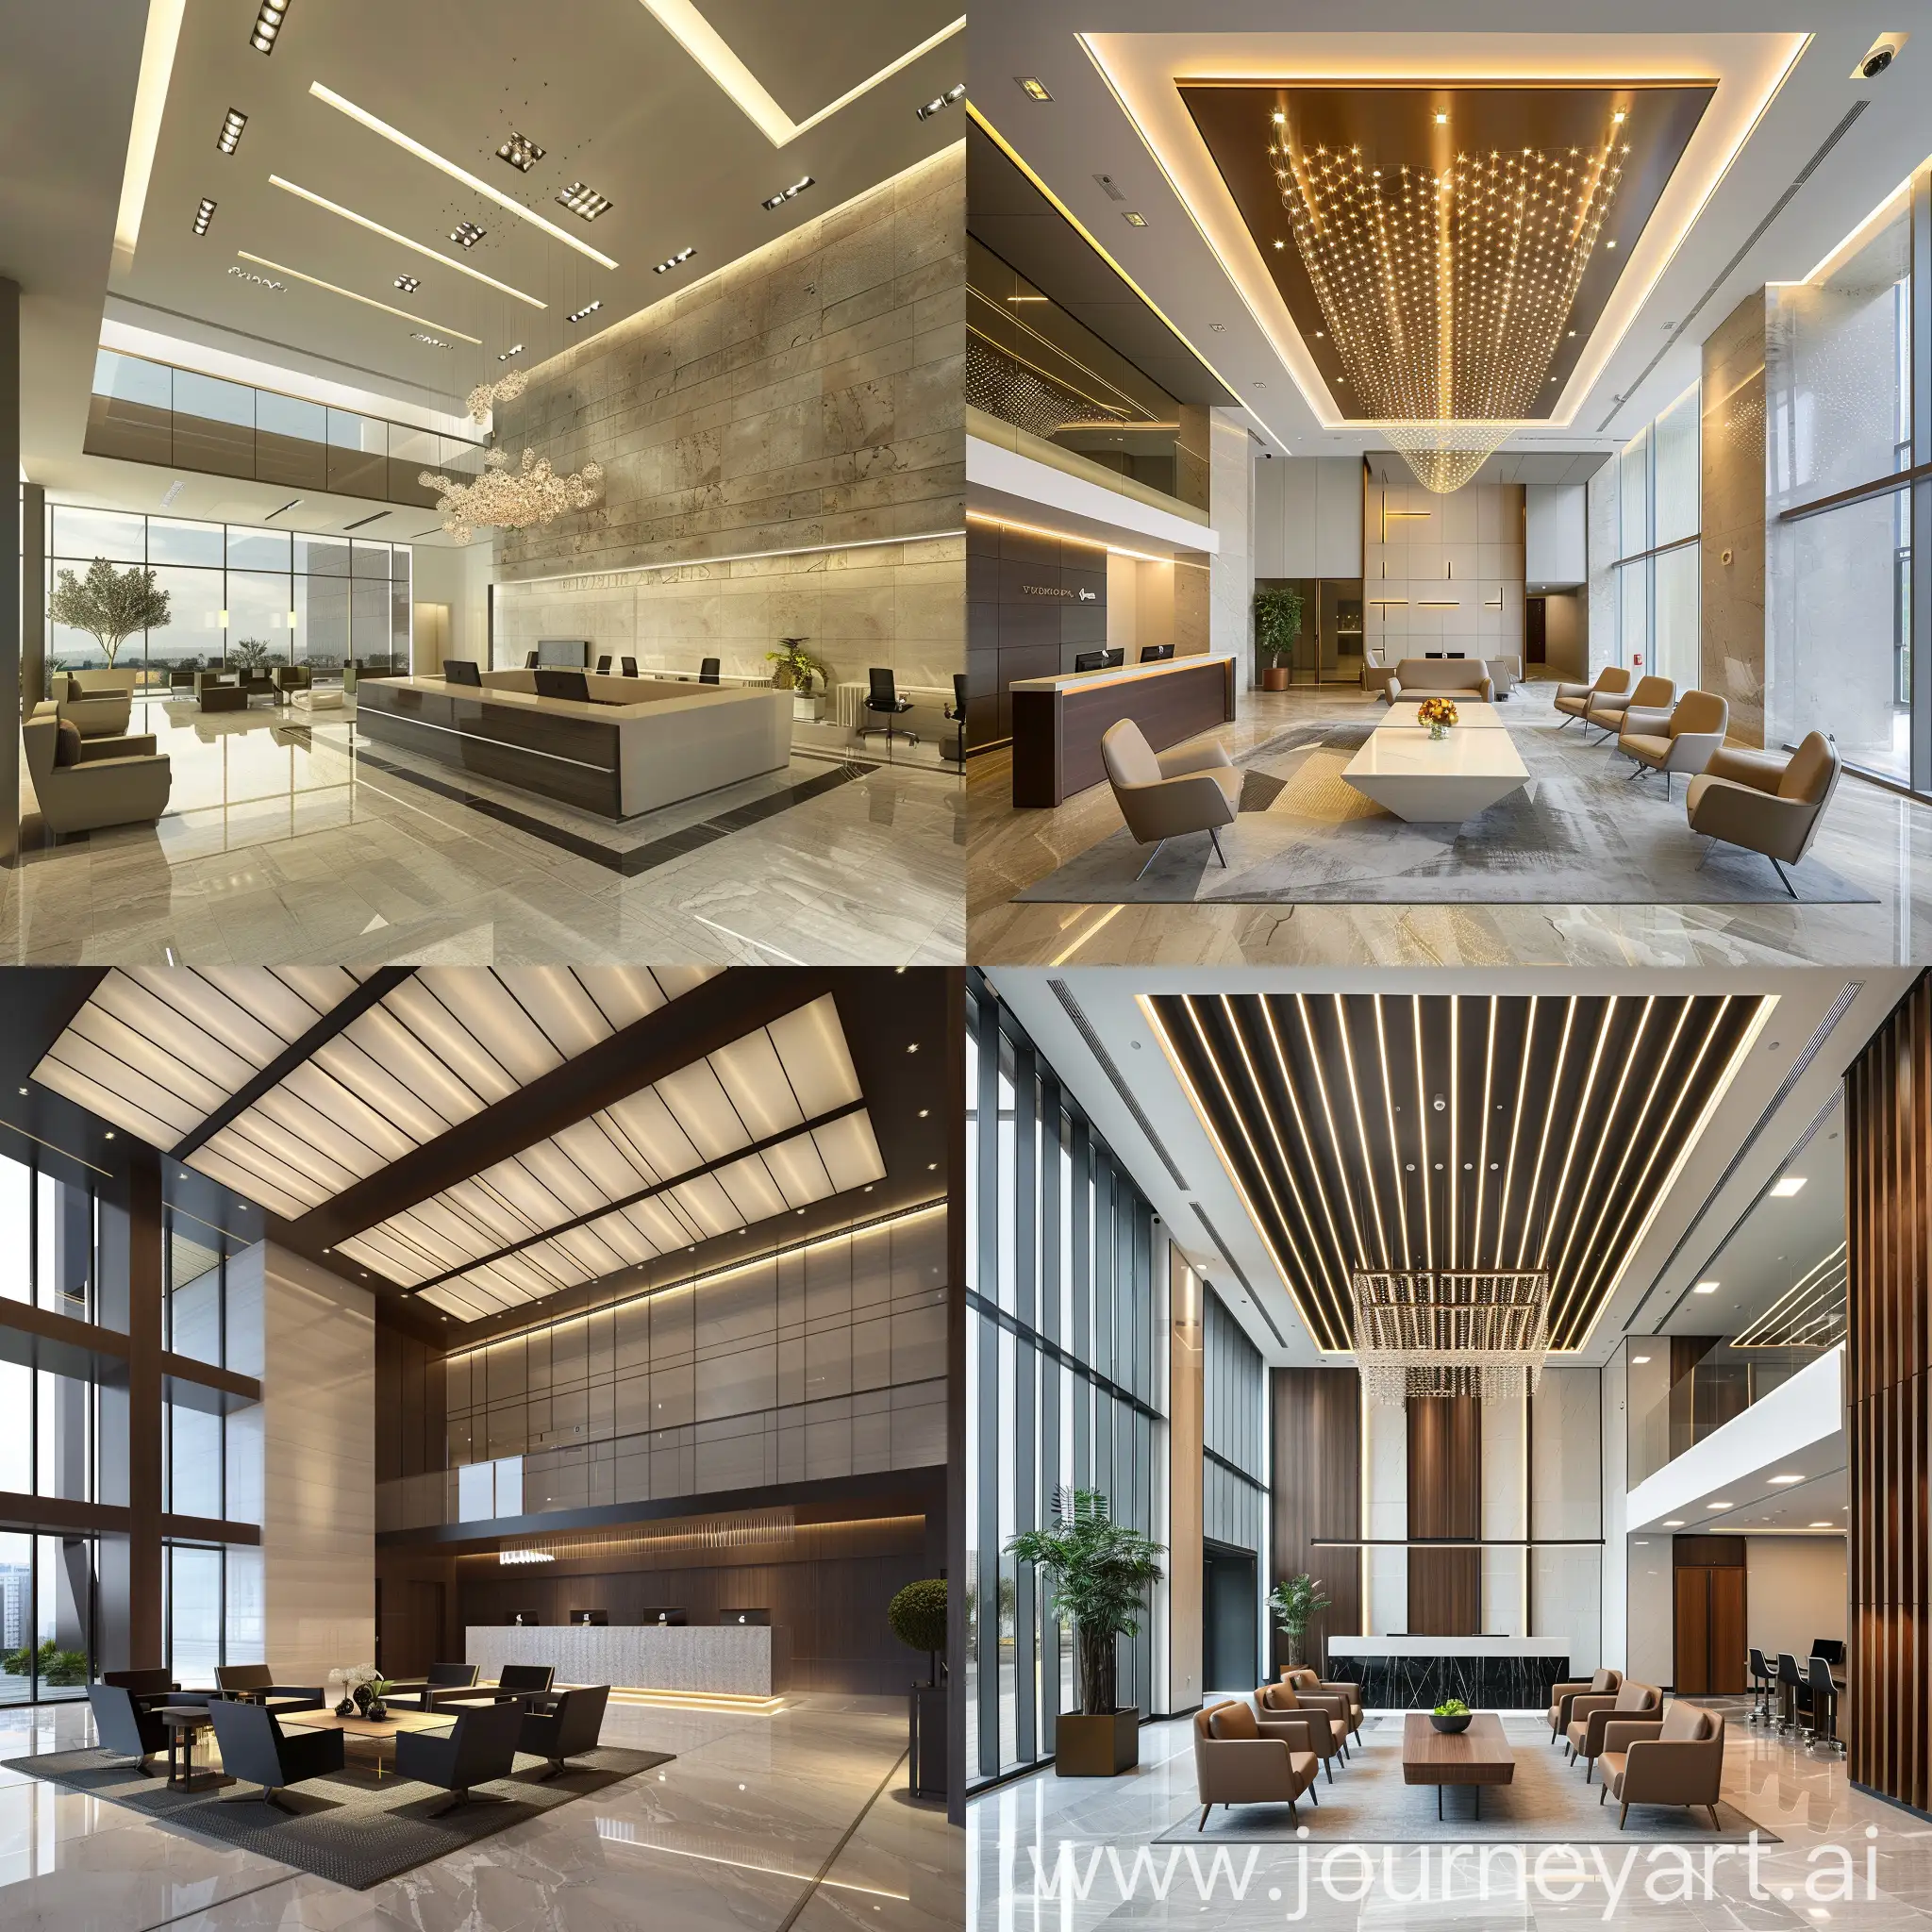 10000 sq.ft square form corporate office lobby with contemporary interior with 4.5mtr ceiling height and grand reception table with waiting area